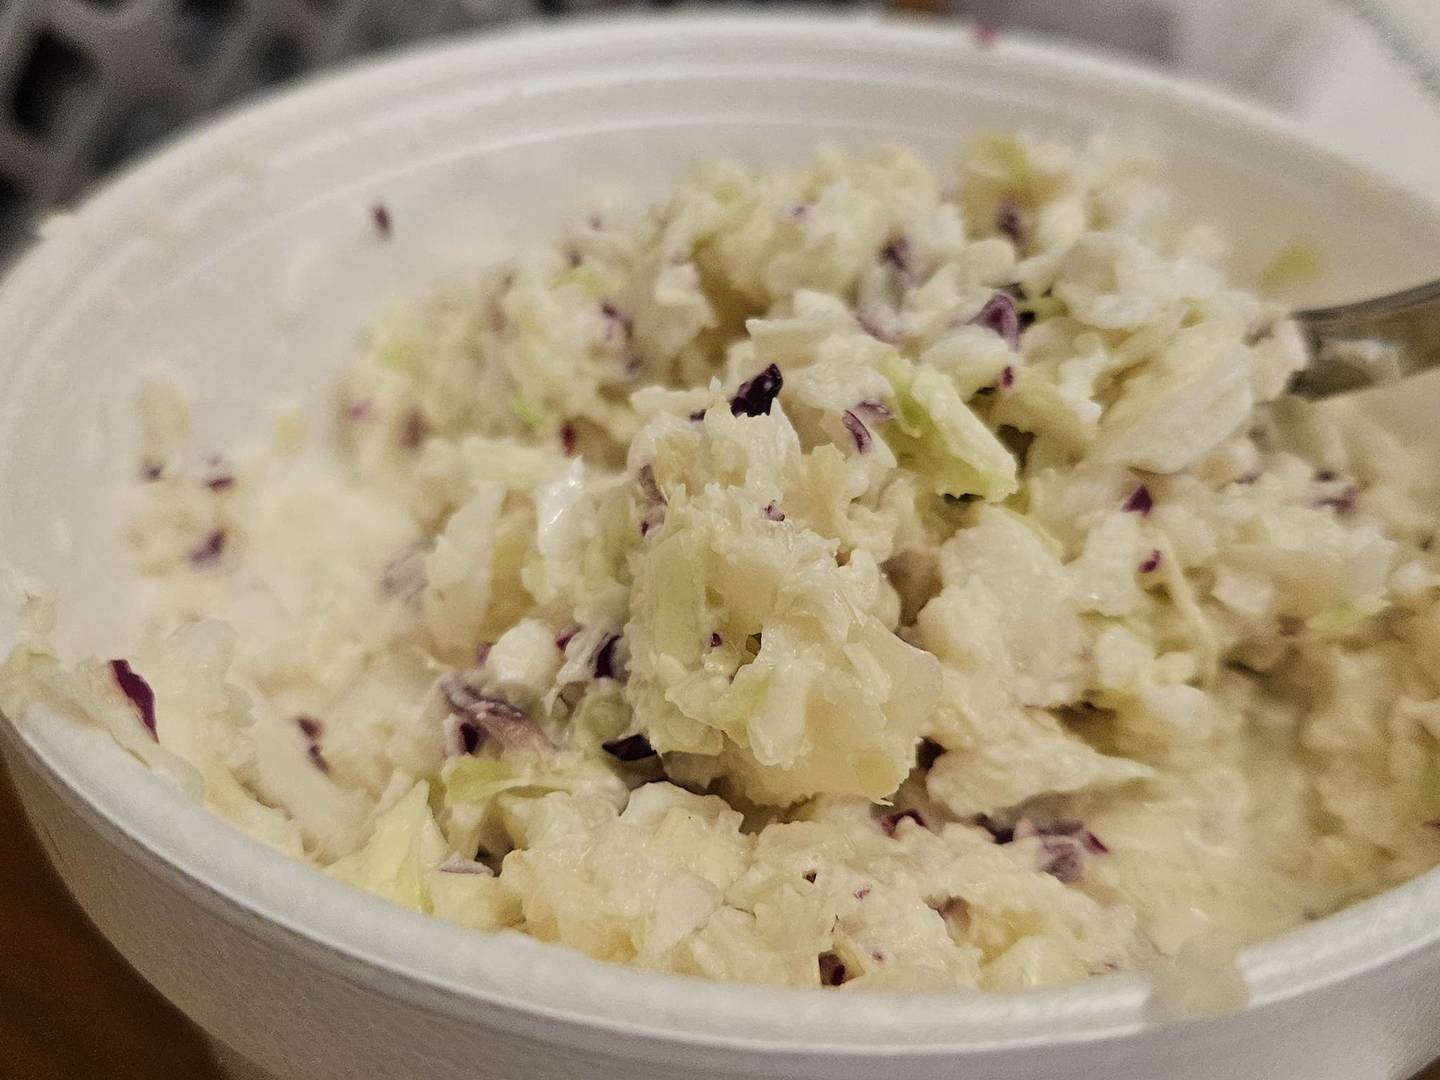 White Fence Farm’s coleslaw isn’t too sweet or creamy. The vegetables are crisp and fresh and served with a hint of vinegar.